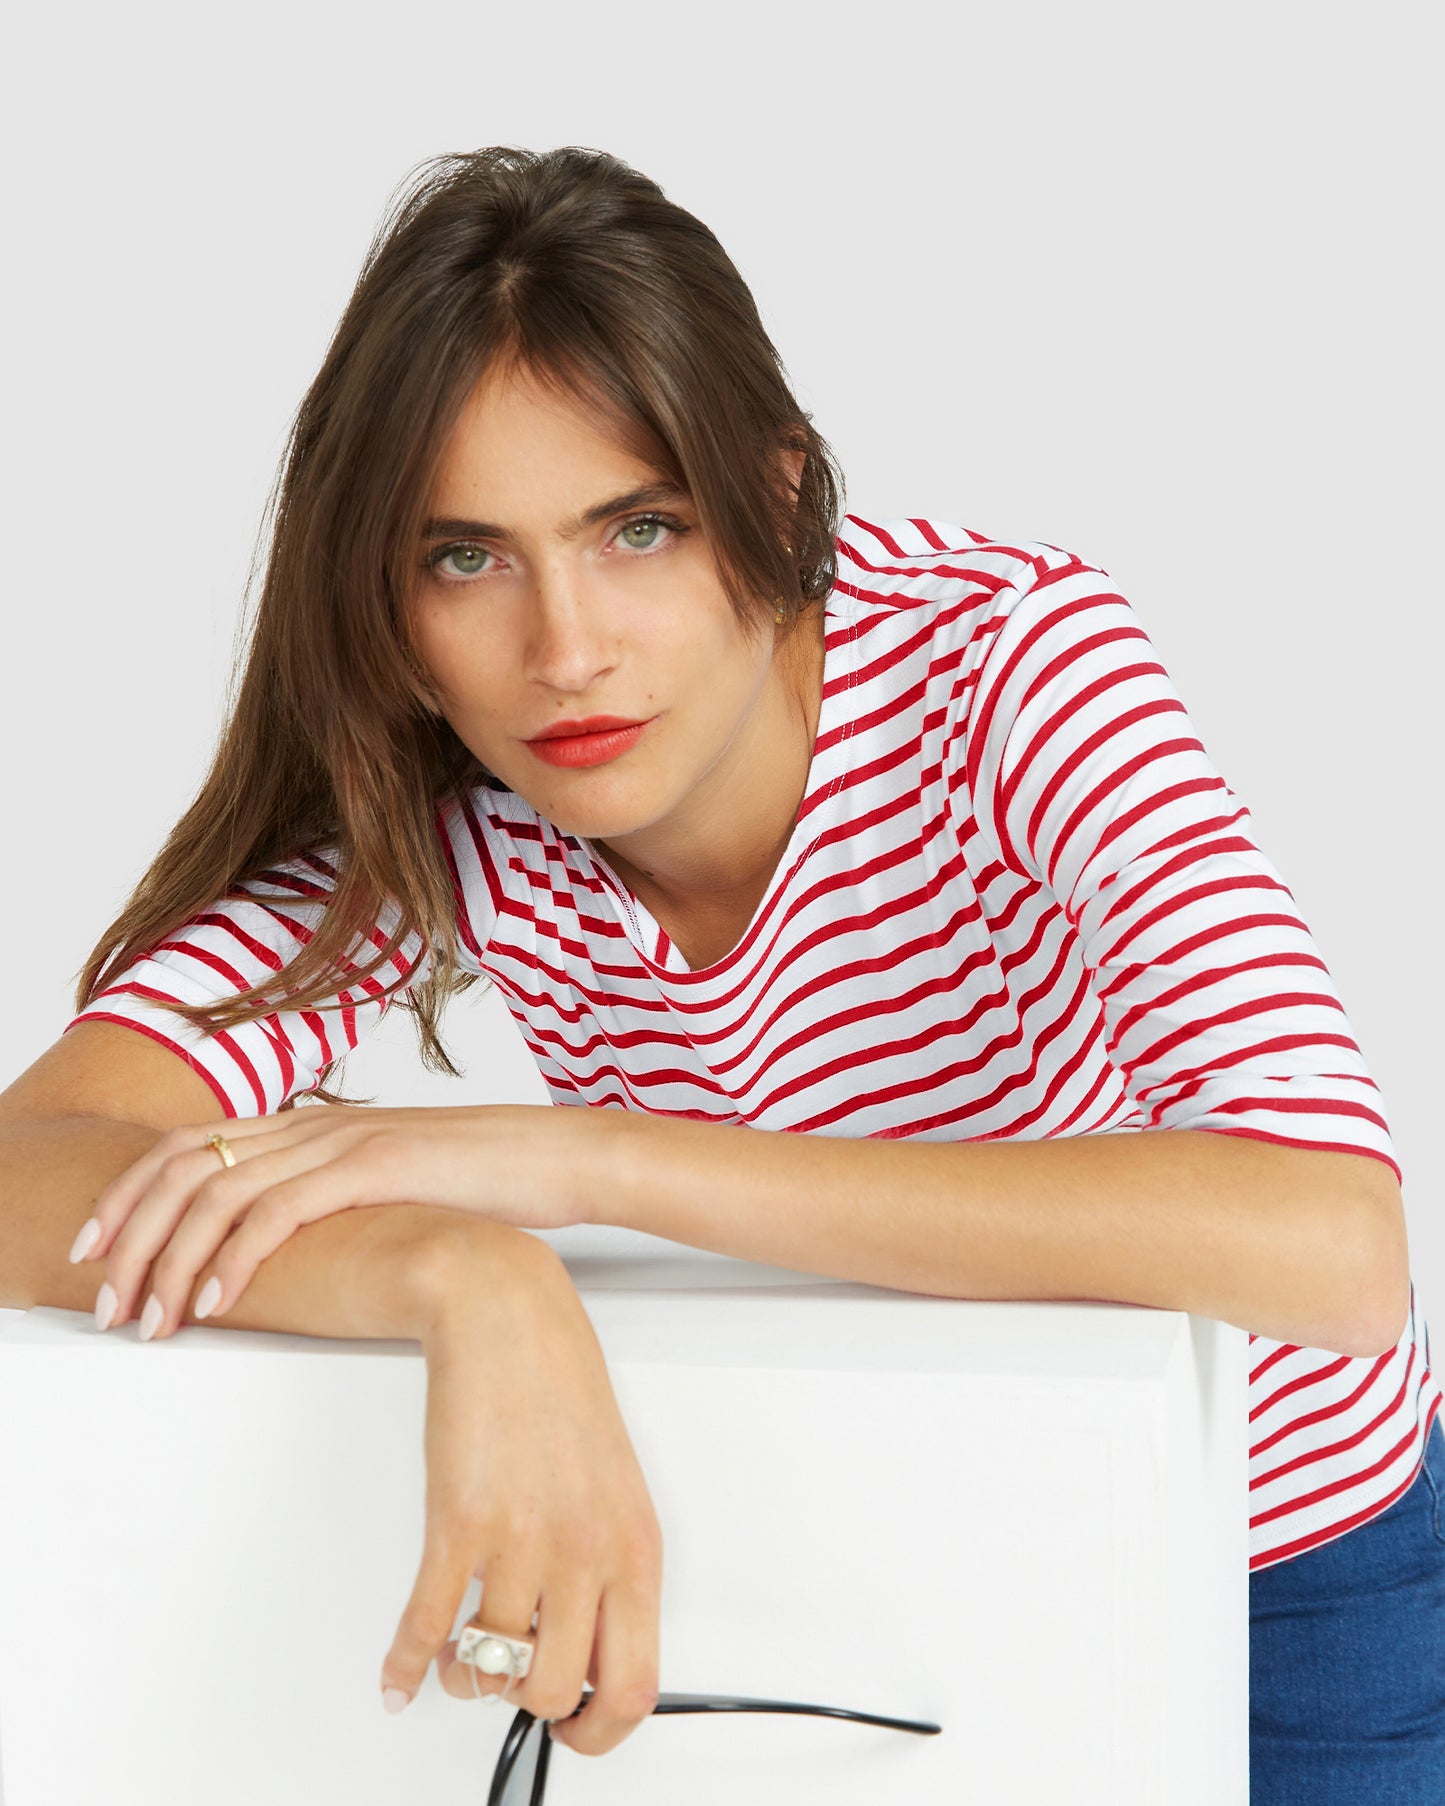 La Bouvier Red Stripe French Tee - Boat Neck PREORDER FOR END APRIL